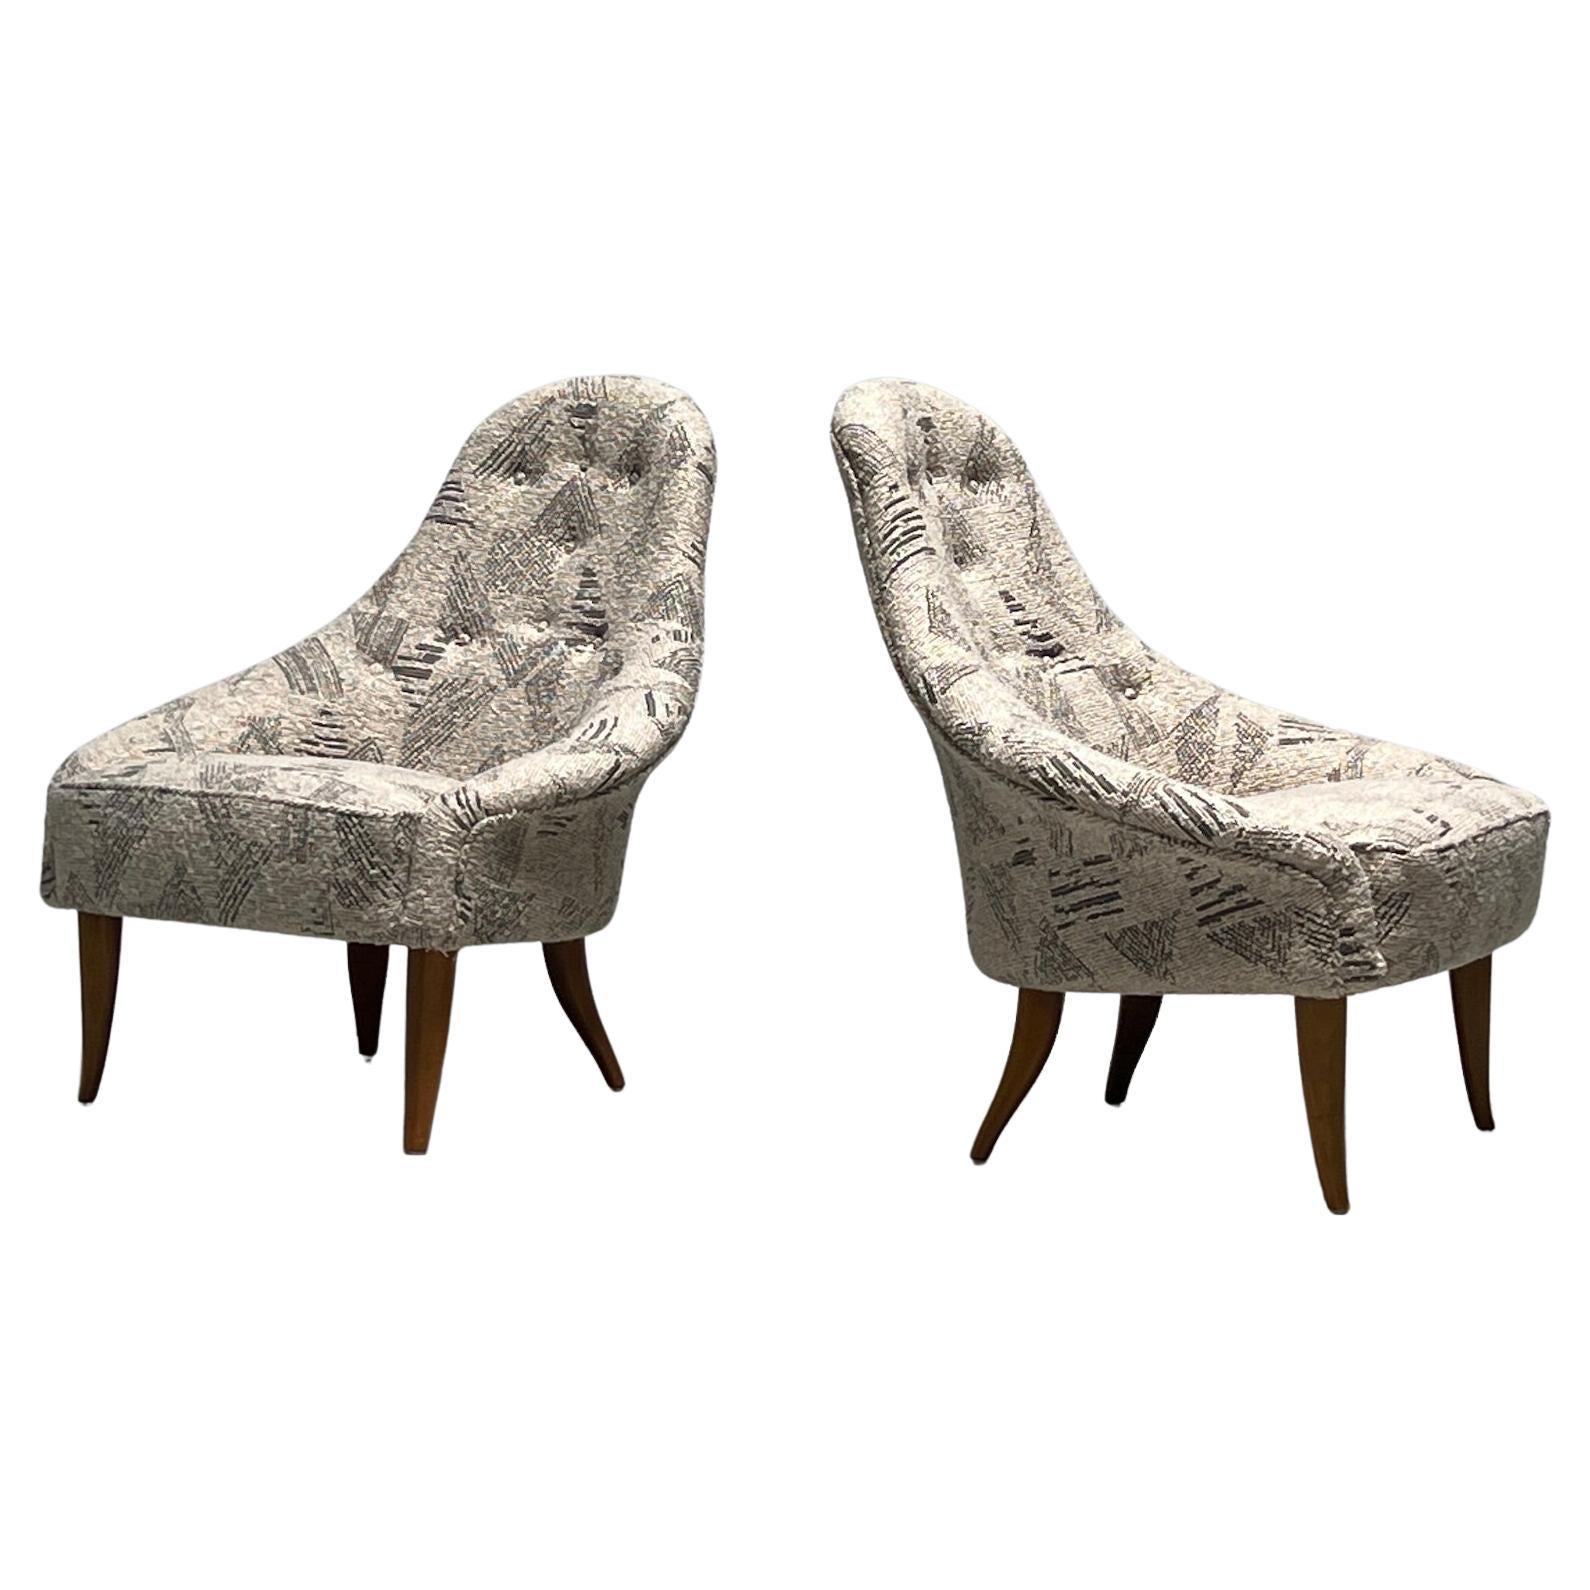 Pair of Lounge Chairs by Kerstin Hörlin-holmquist For Sale